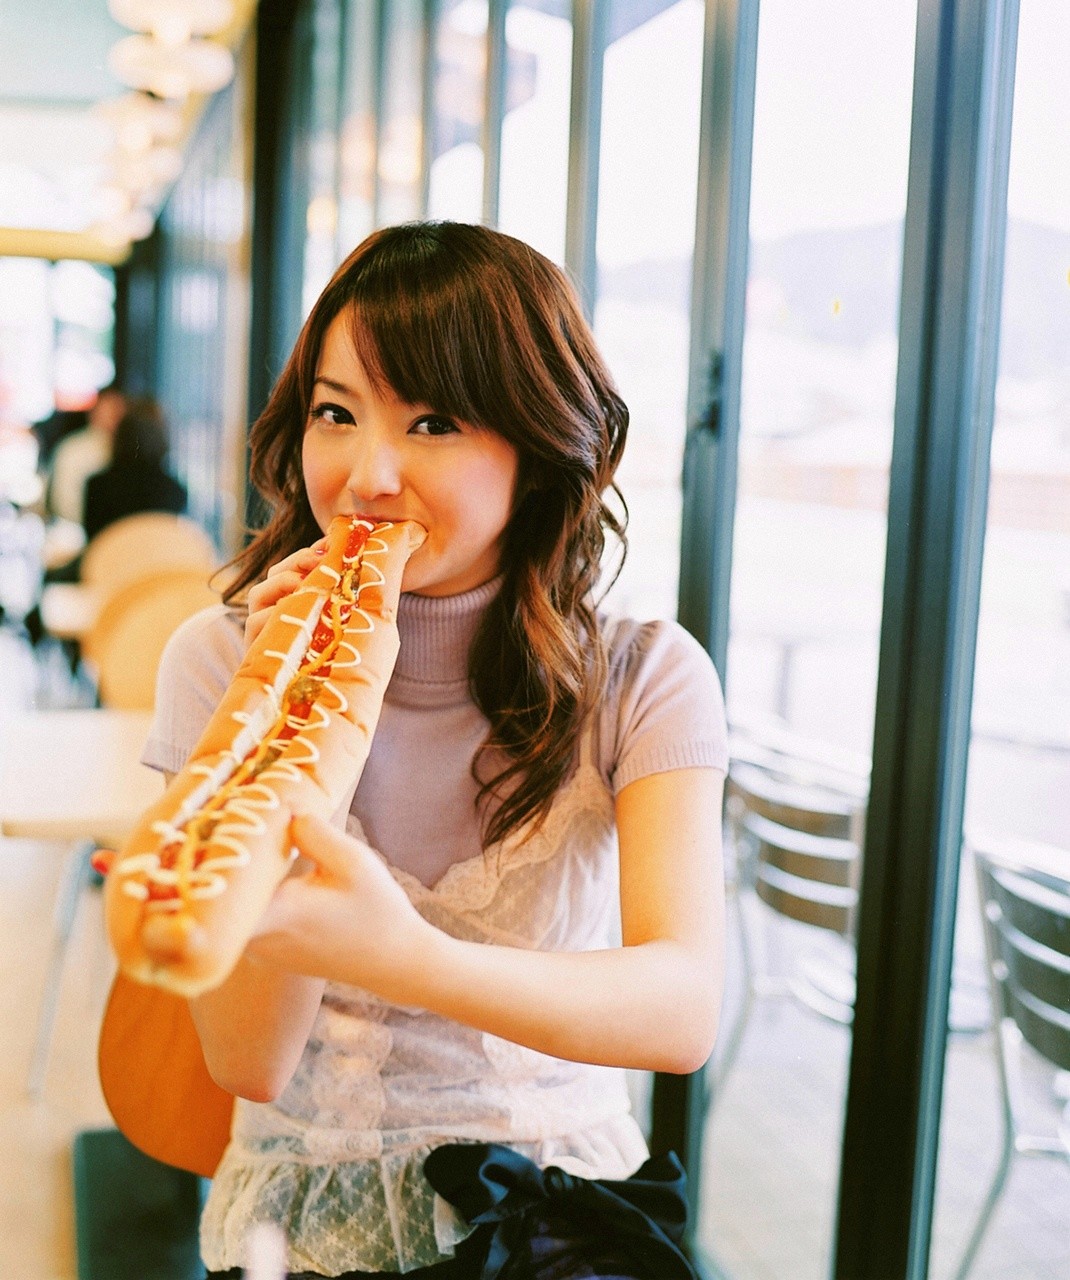 Sasaki Nozomi Asian Visual Young Jum Women Brunette Eating Hot Dogs Curly Hair Brown Eyes Looking At 1070x1280